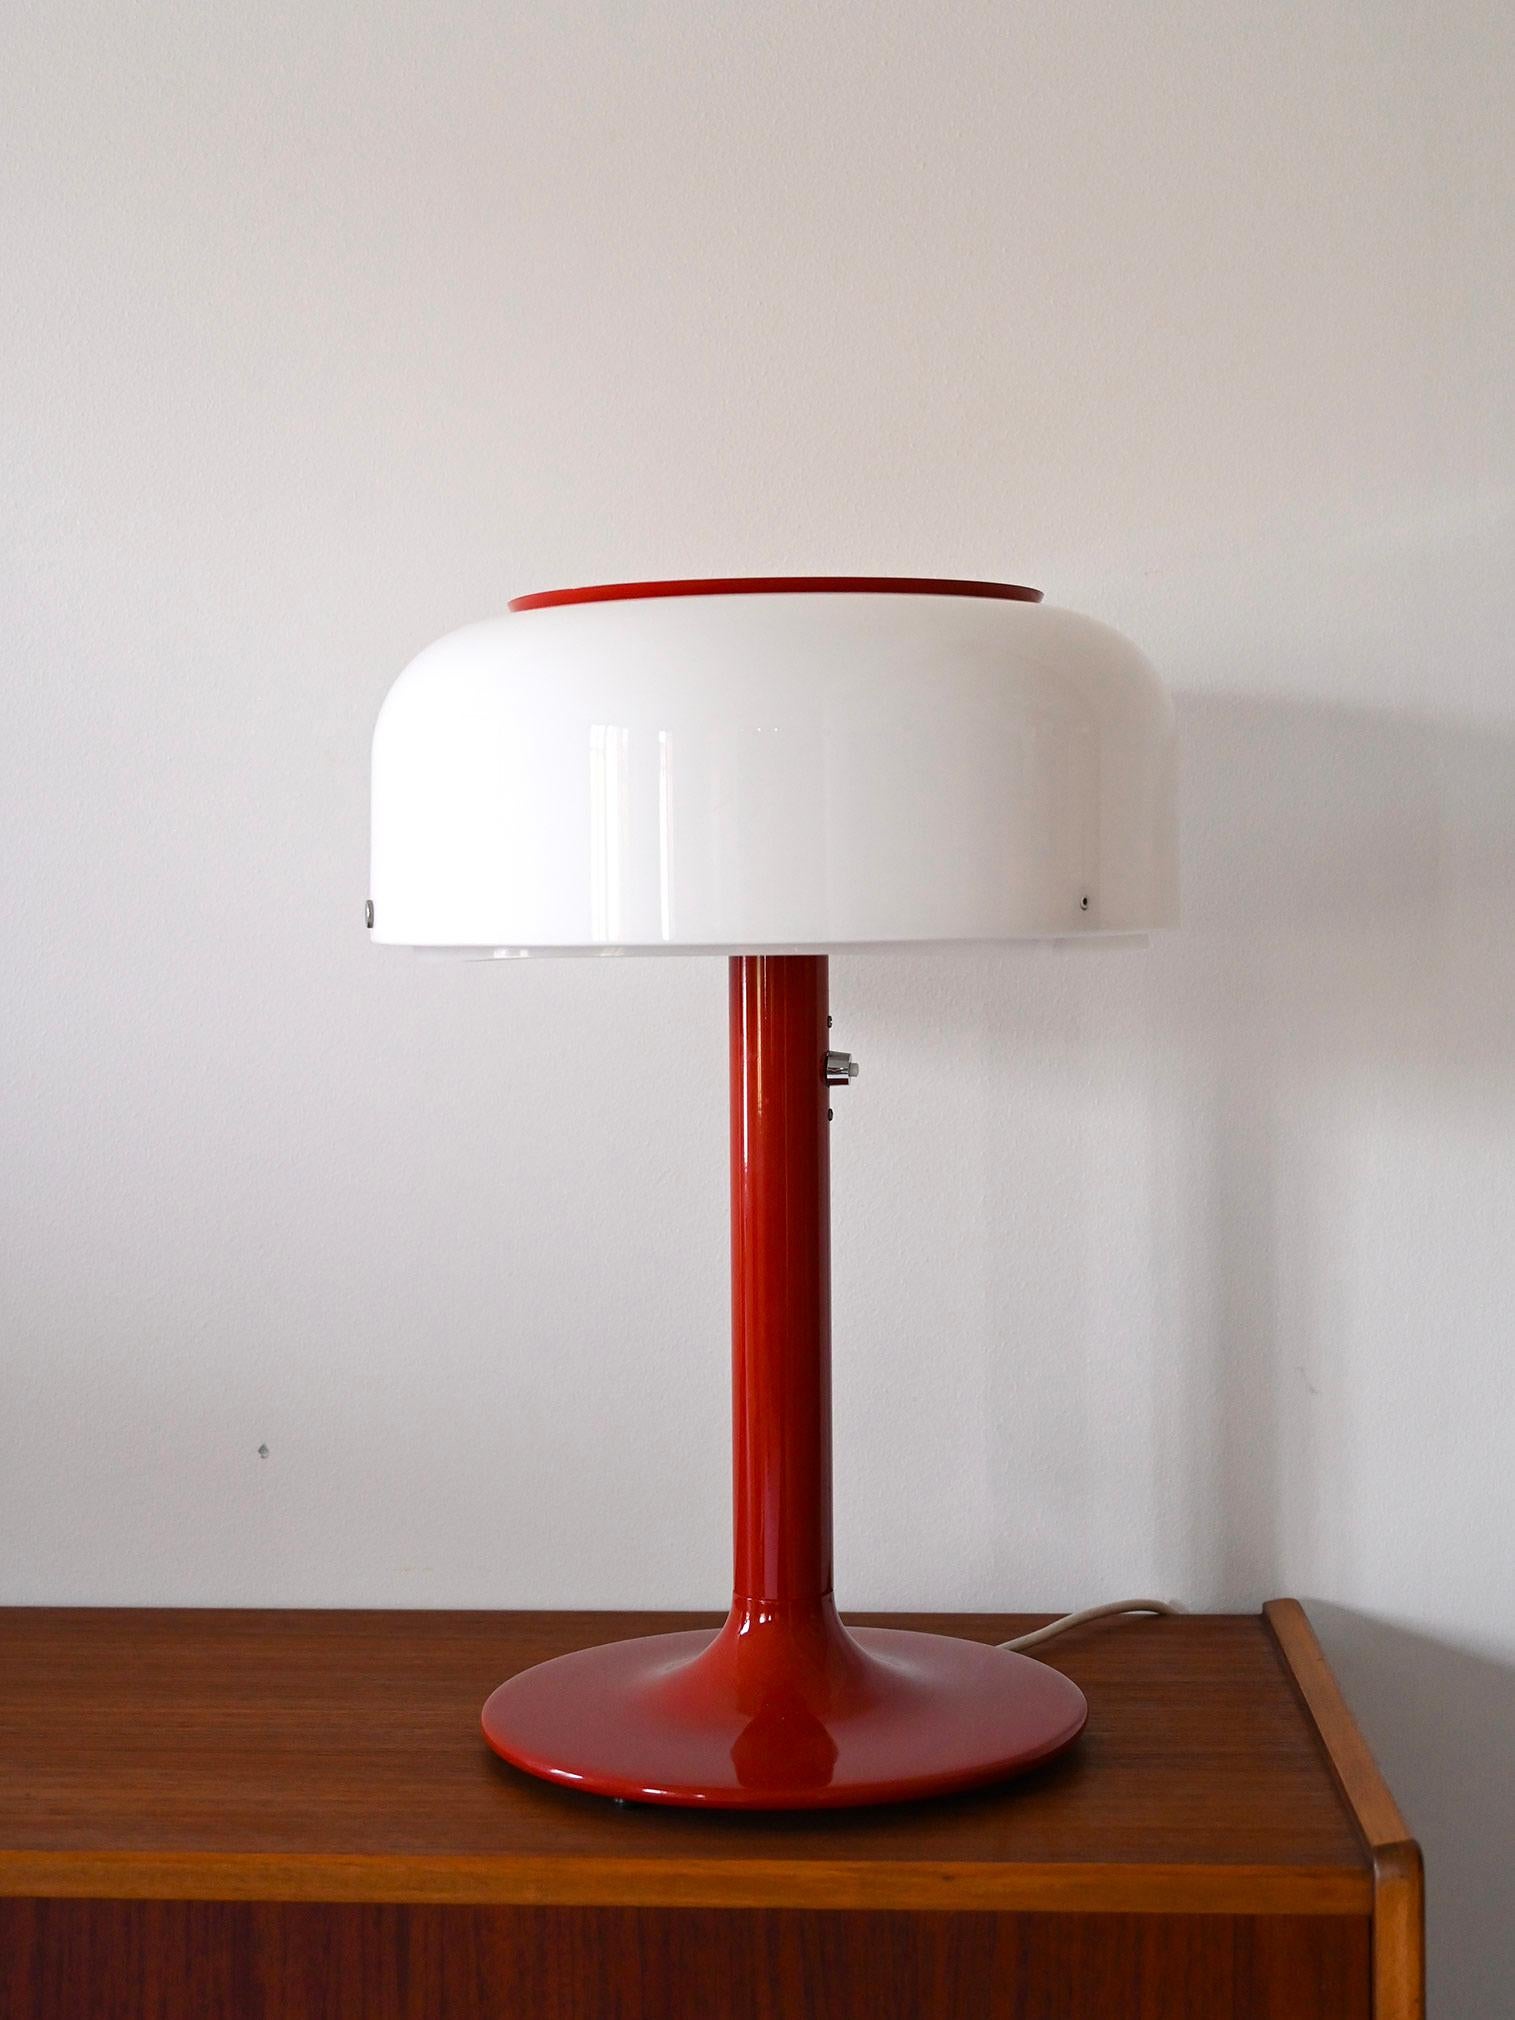 'Knubbling' model lamp by Anders Pehrson for Atelje Lyktan, 1968.

A Scandinavian design piece with a modern flavor whose mushroom shape has become iconic worldwide. Consists of the chrome-plated steel stem and acrylic shade equipped with anti-glare